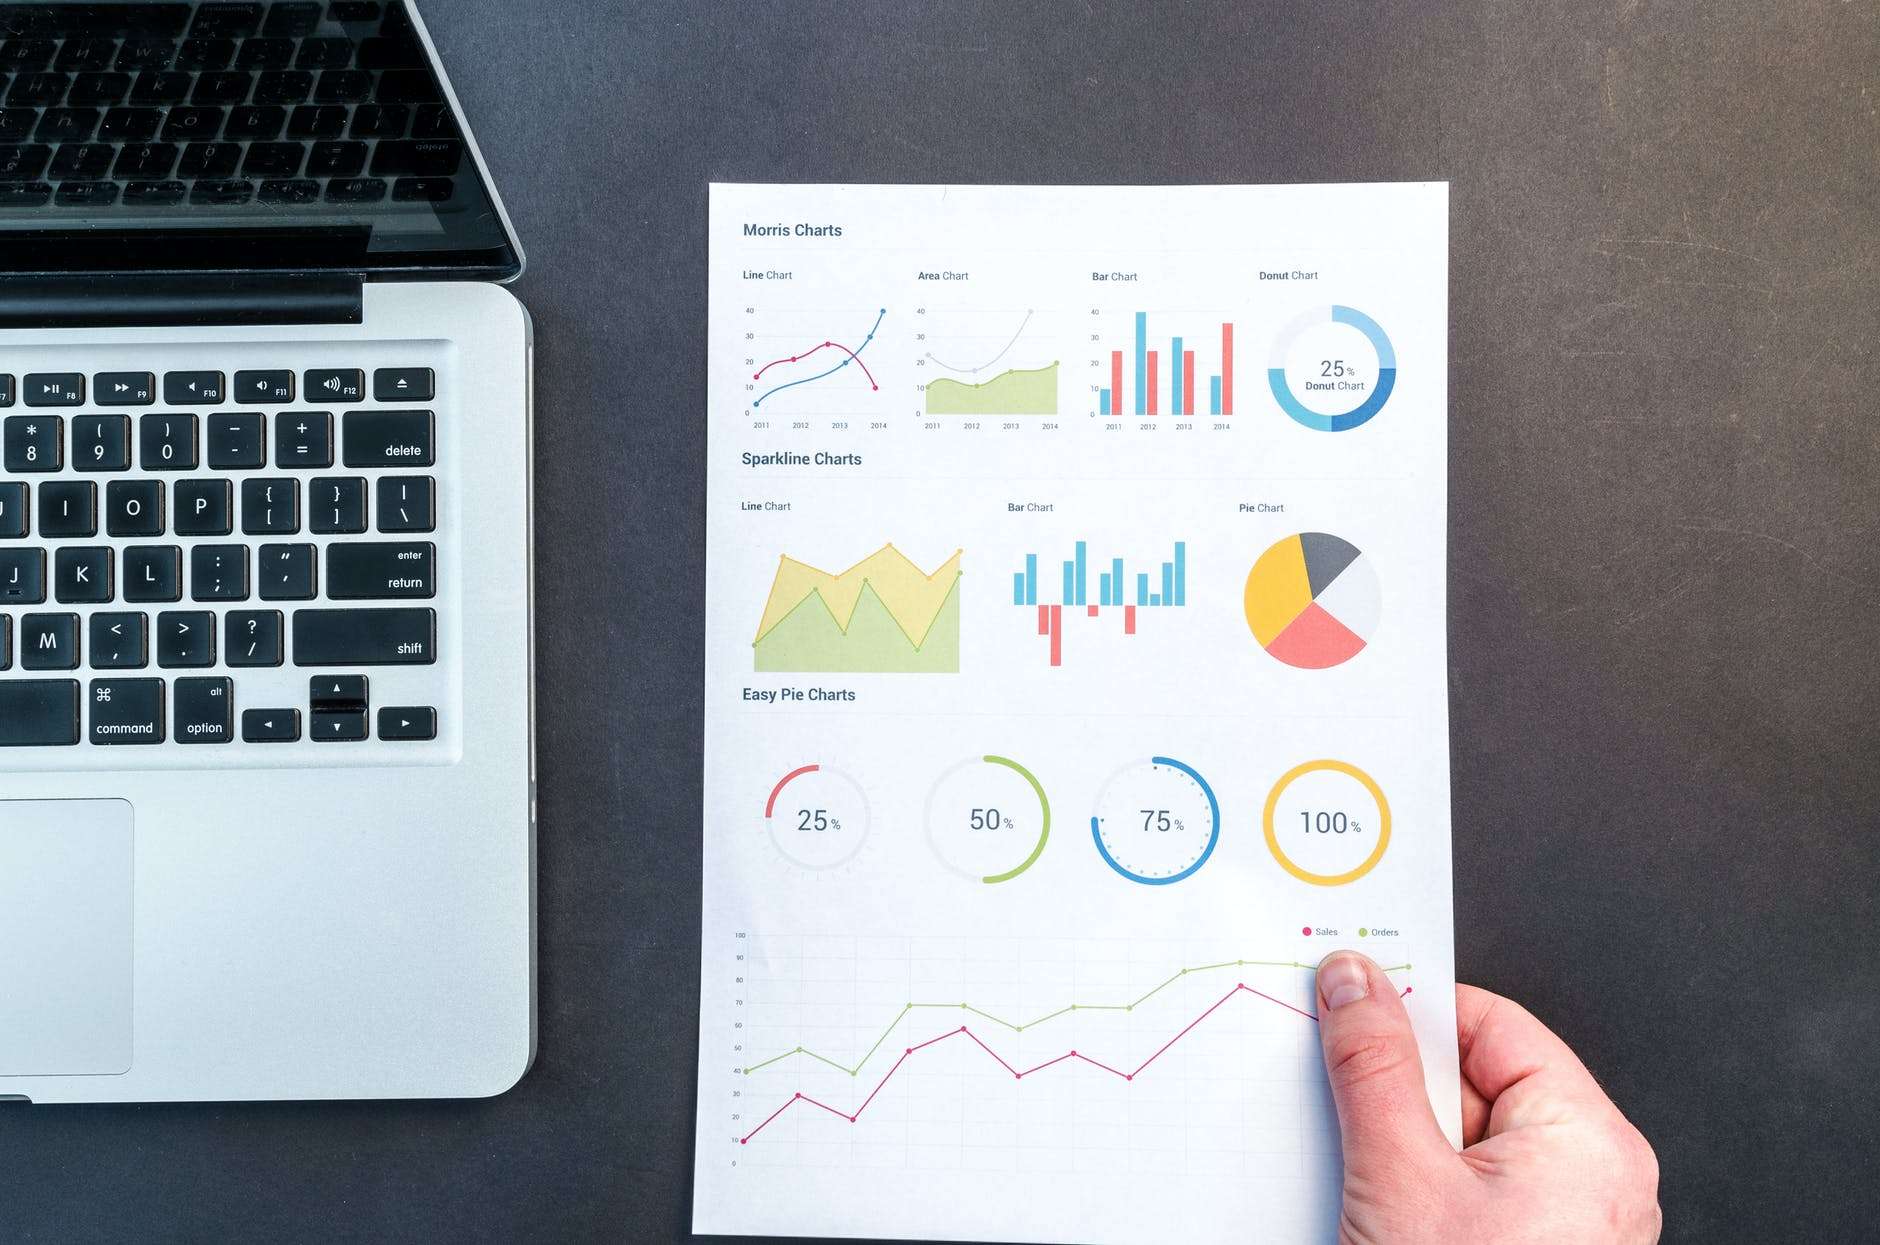 What are 3 Social Media Metrics Every Business Should Track?